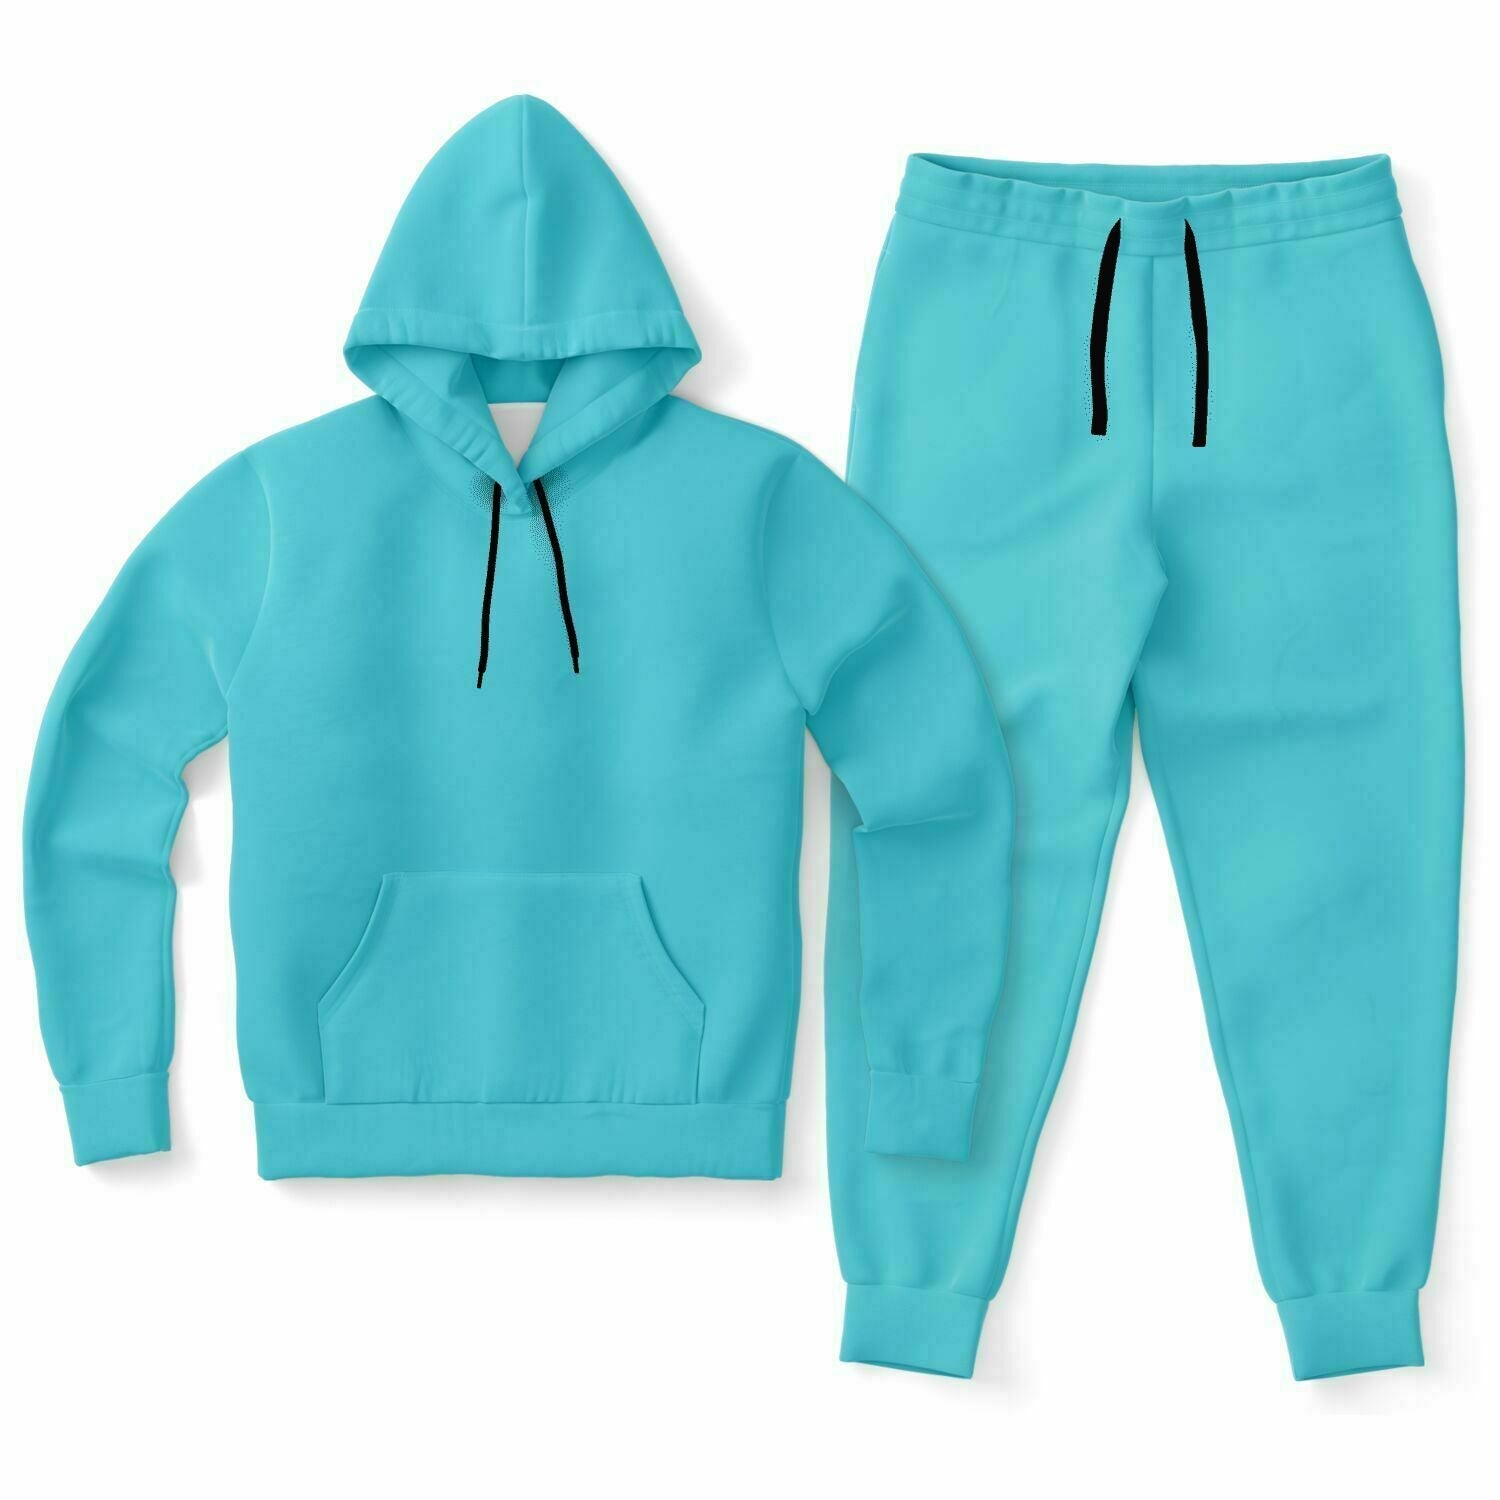 Ocean Blue Men's Hoodie and Jogger Set - XS / XS - Sport Finesse